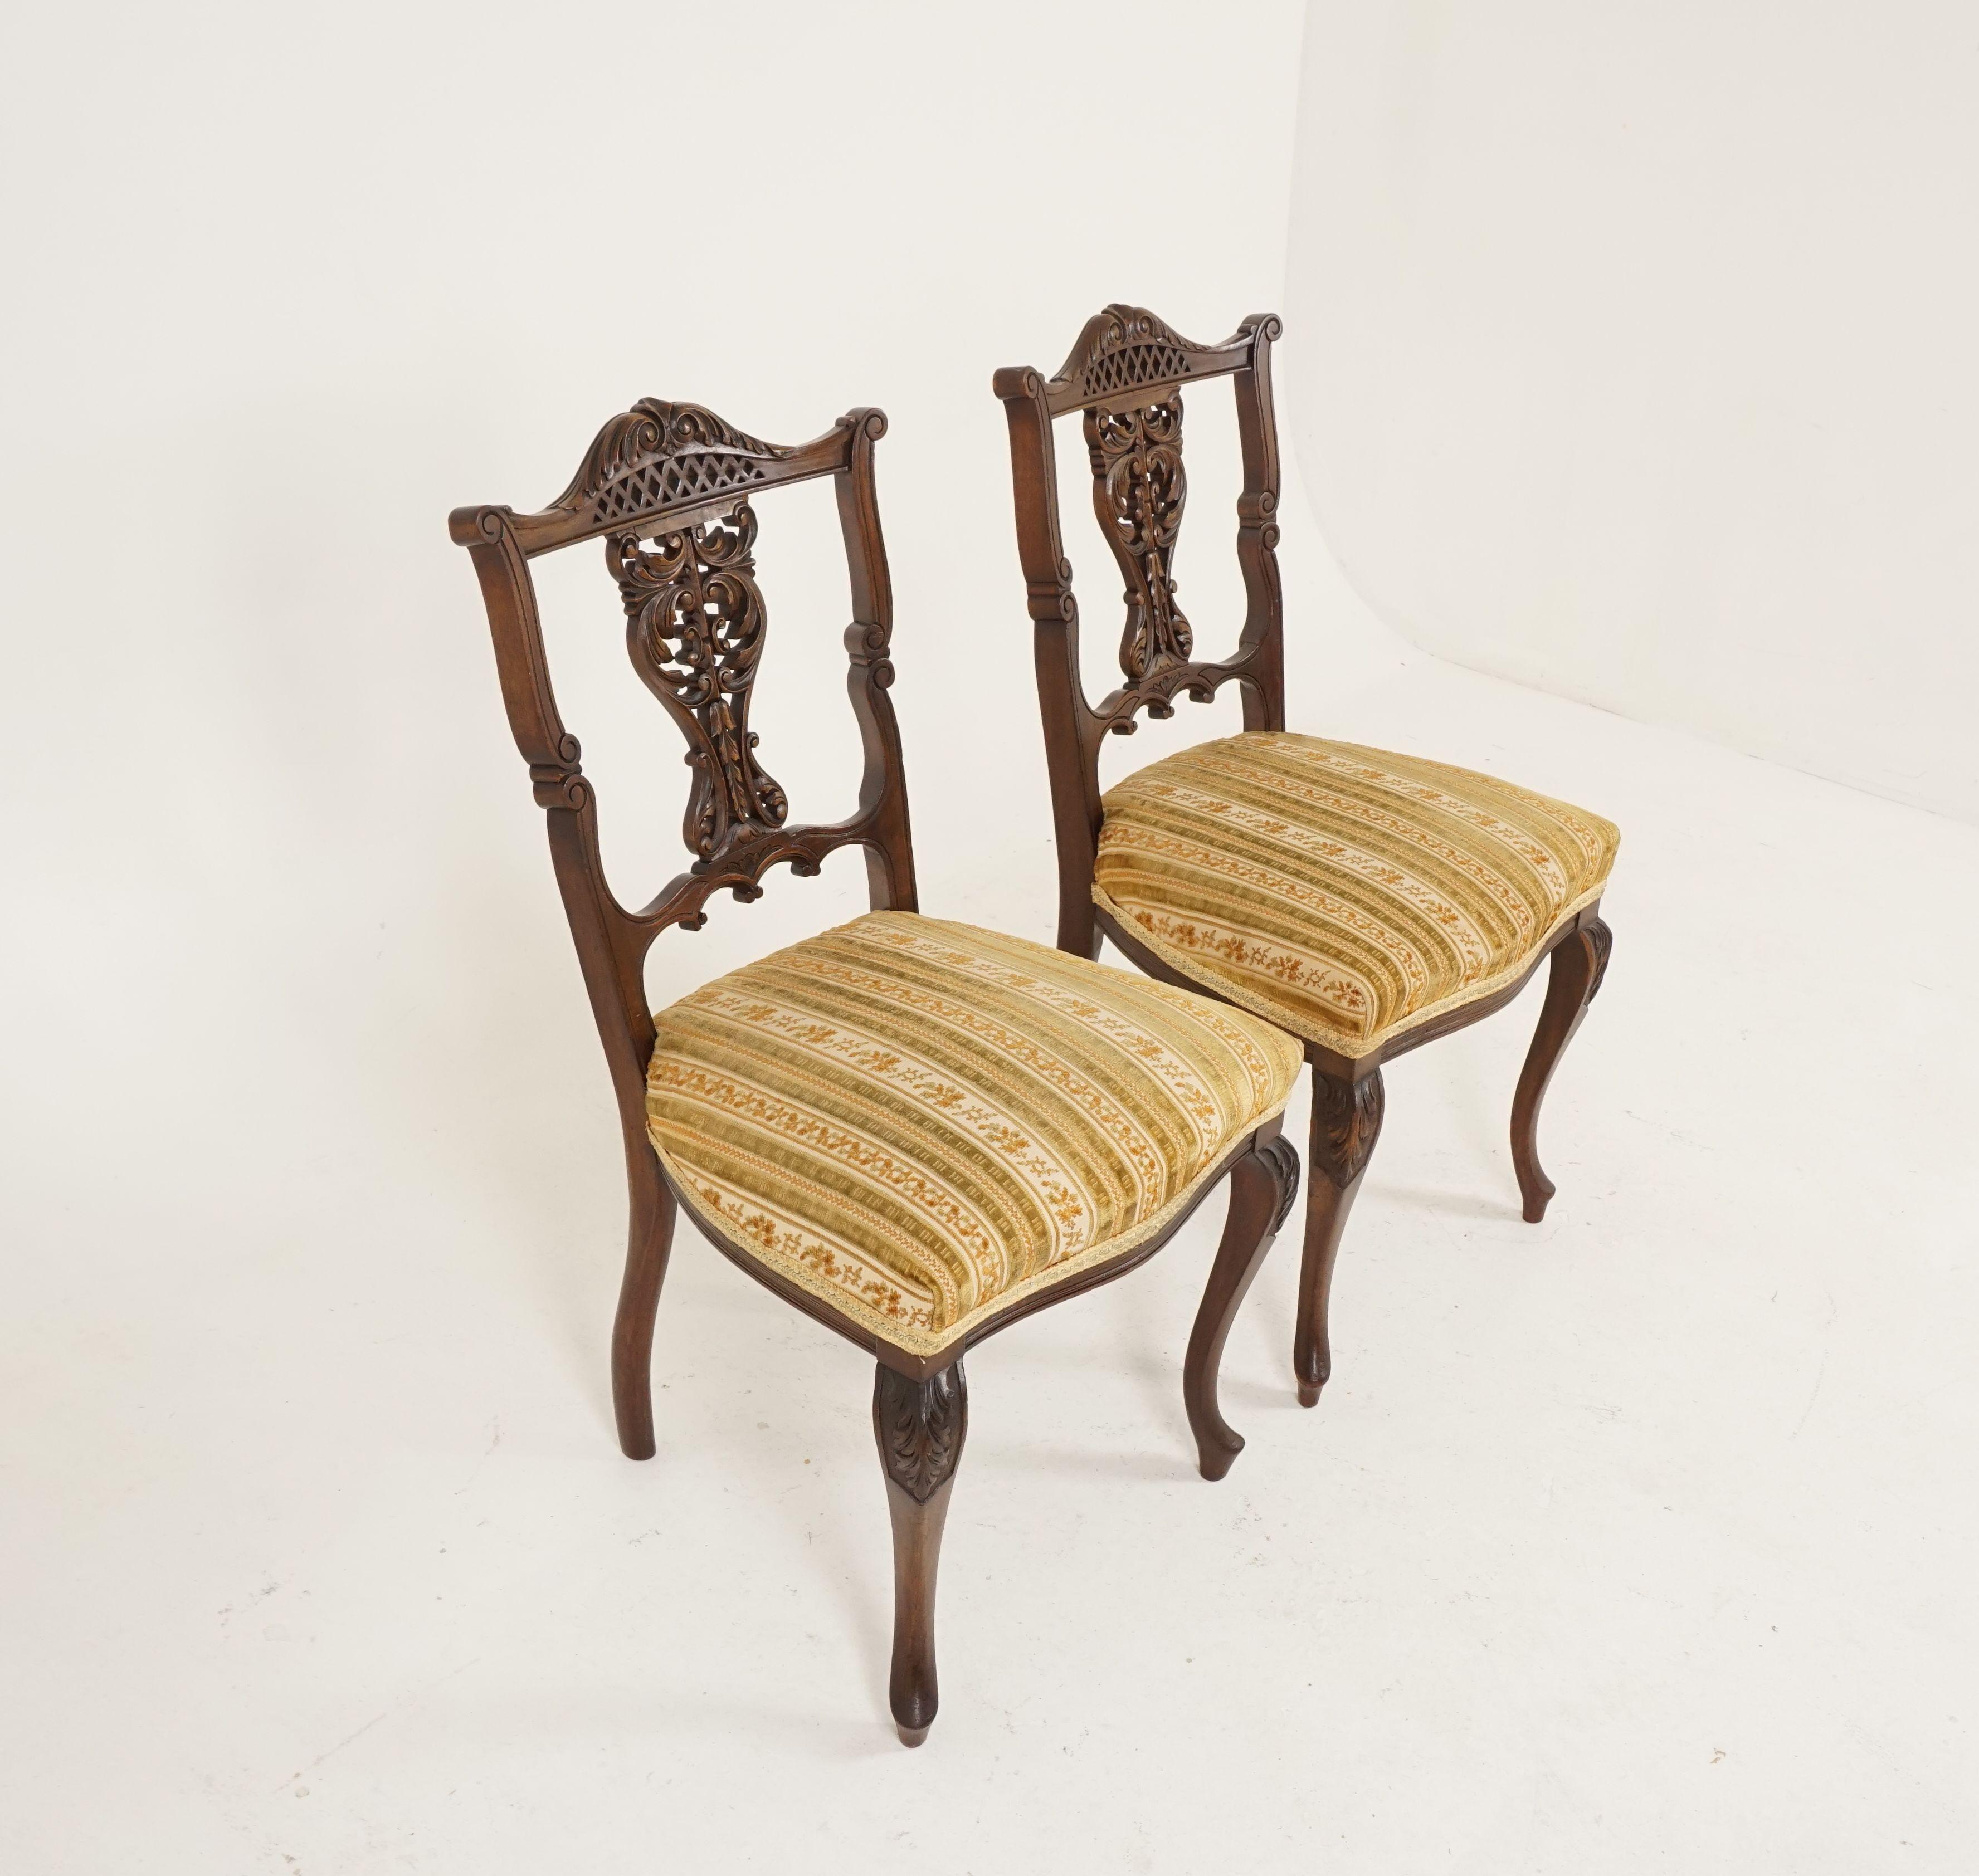 Antique pair of upholstered Walnut parlour or side chairs, Scotland 1900, B1364

Scotland 1900
Solid Walnut
Original finish
Very attractive top rail and carved center splat
Upholstered seat in a cotton fabric
They are raised on tall carved cabriole